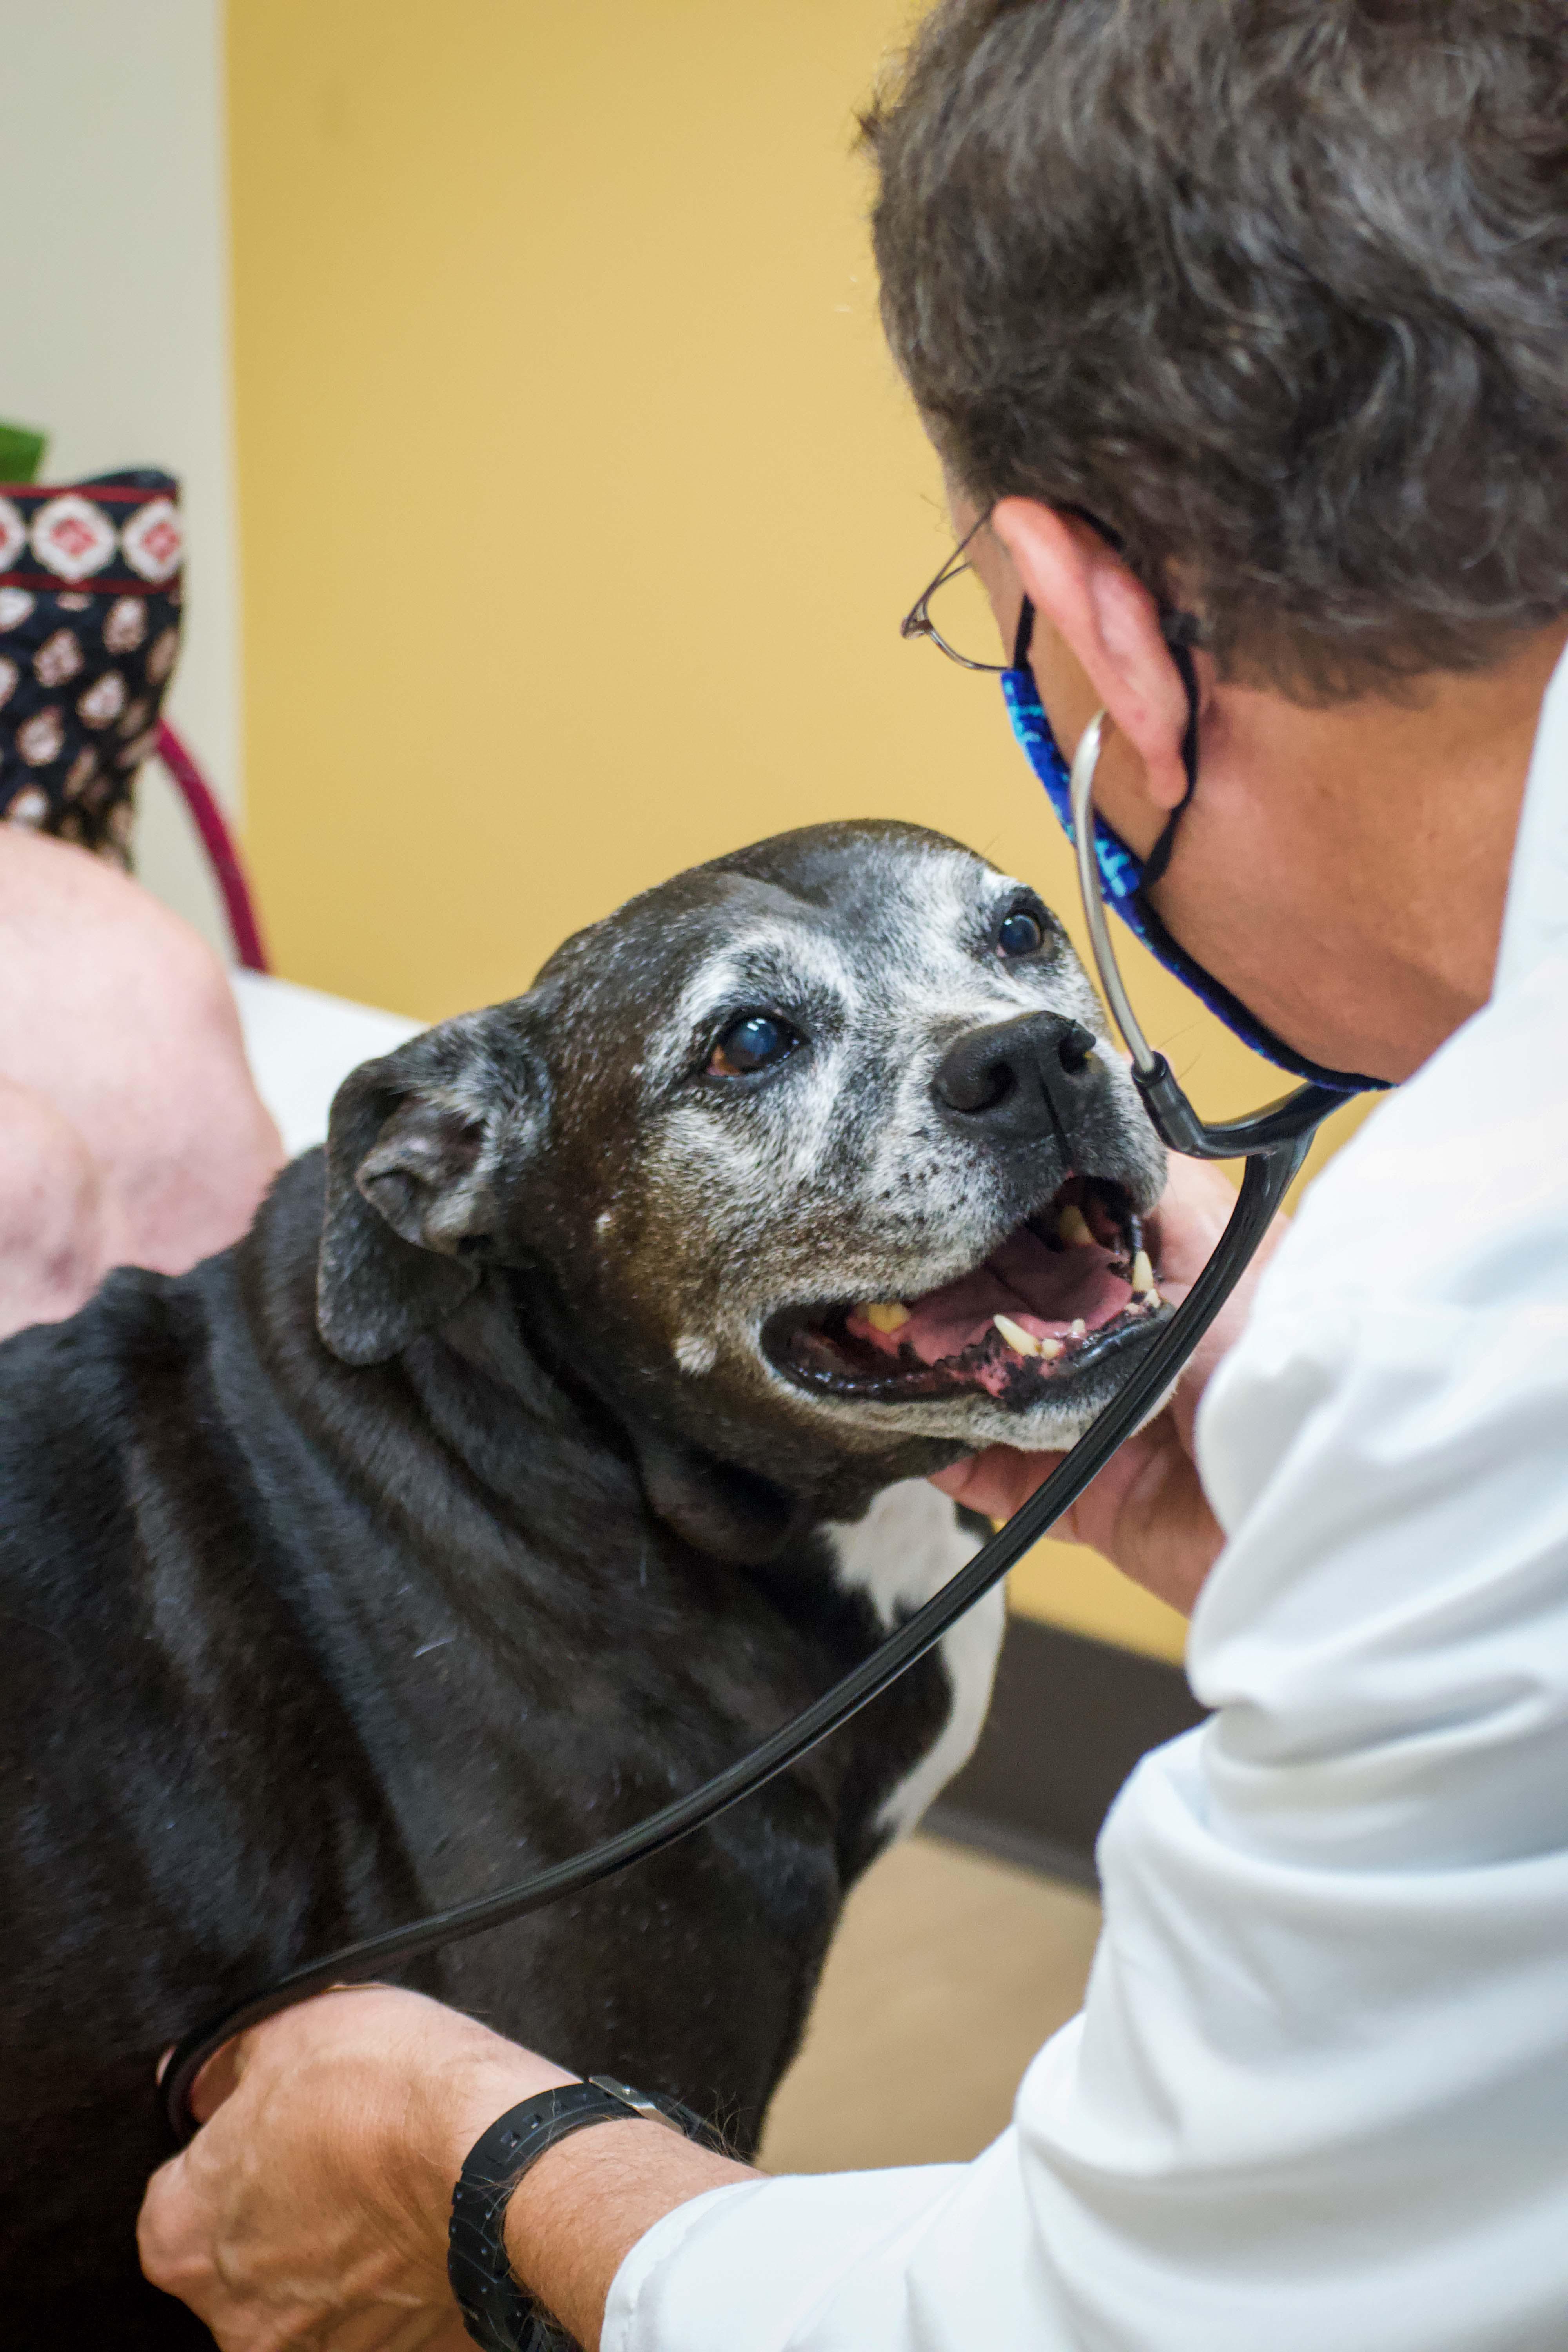 Preventative care saves and extends lives. With it, we prevent or treat health issues before they turn into something more serious. So whether your furry family member needs their regular annual exam, parasite control, vaccinations, or anything else – know that the TotalBond has their back.